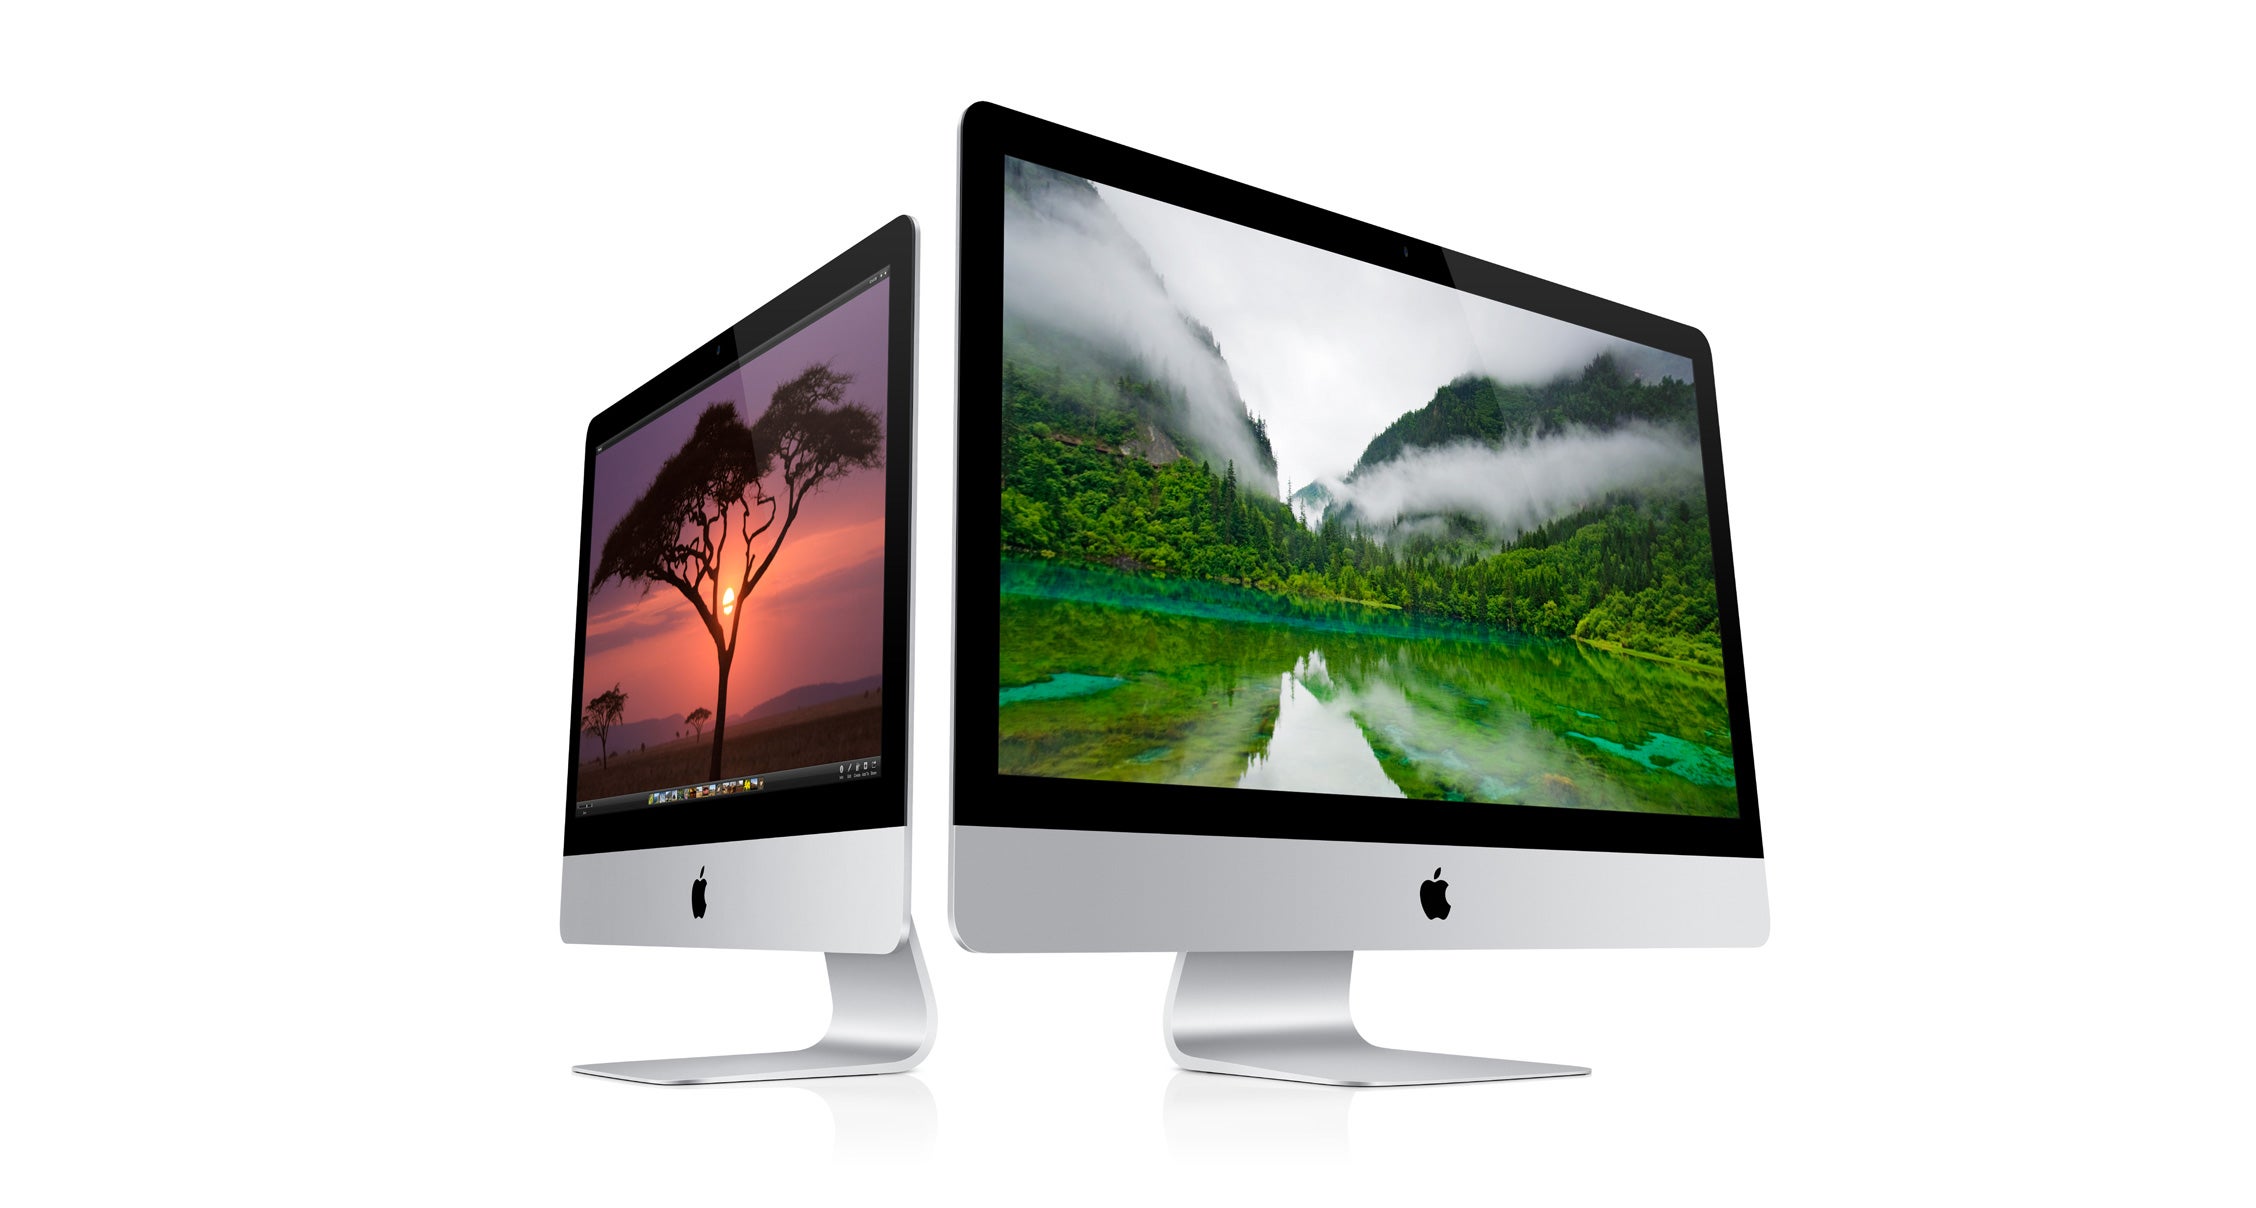 The new iMac - looks the same as last year's model but with improvements to the hard drive, the processor and Wi-Fi speeds.